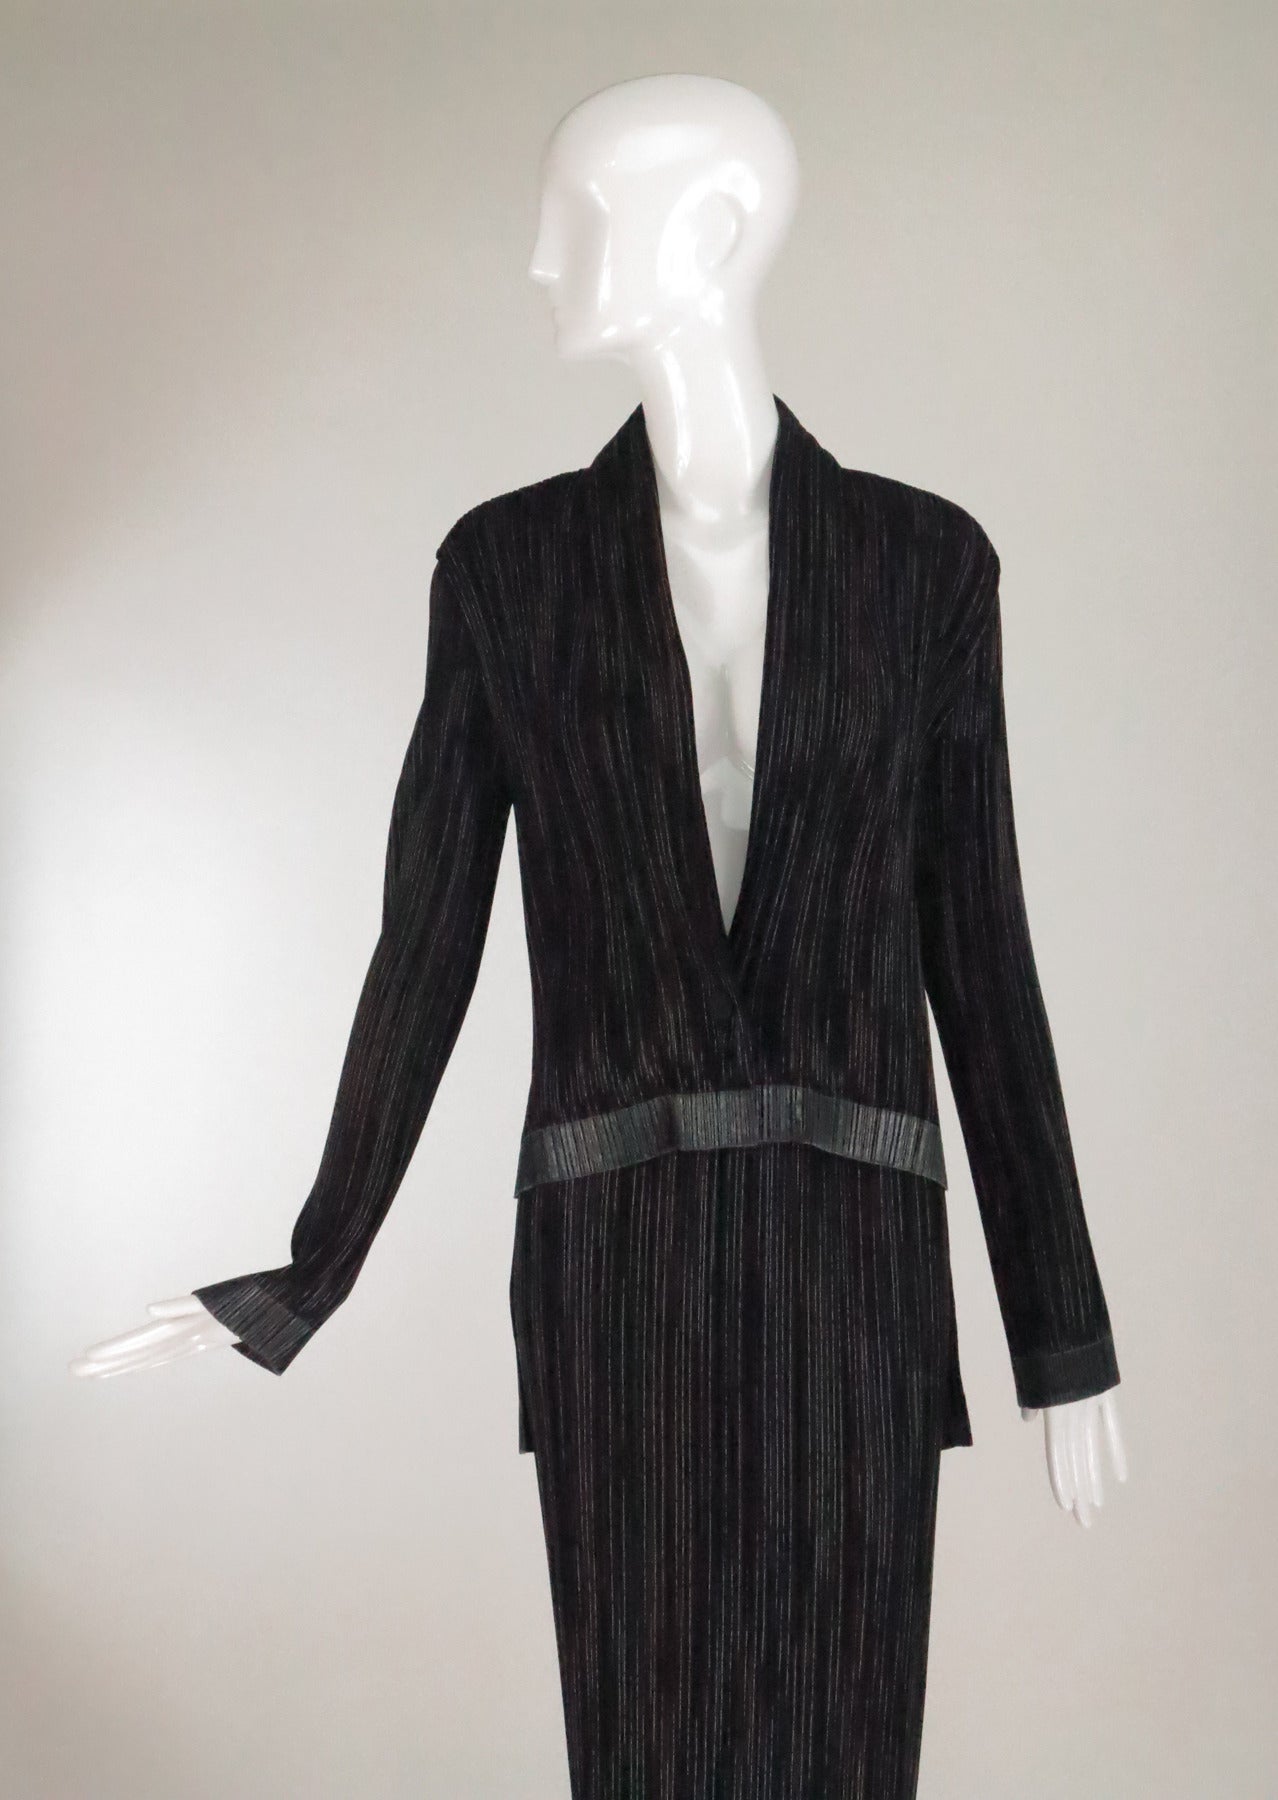 Black, white and silver pleated fabric with metallic thread...2pc Skirt and jacket set...The long sleeve jacket is unlined, with a shawl collar and tails at the back...The jacket closes with a single button at the front and there is a matching